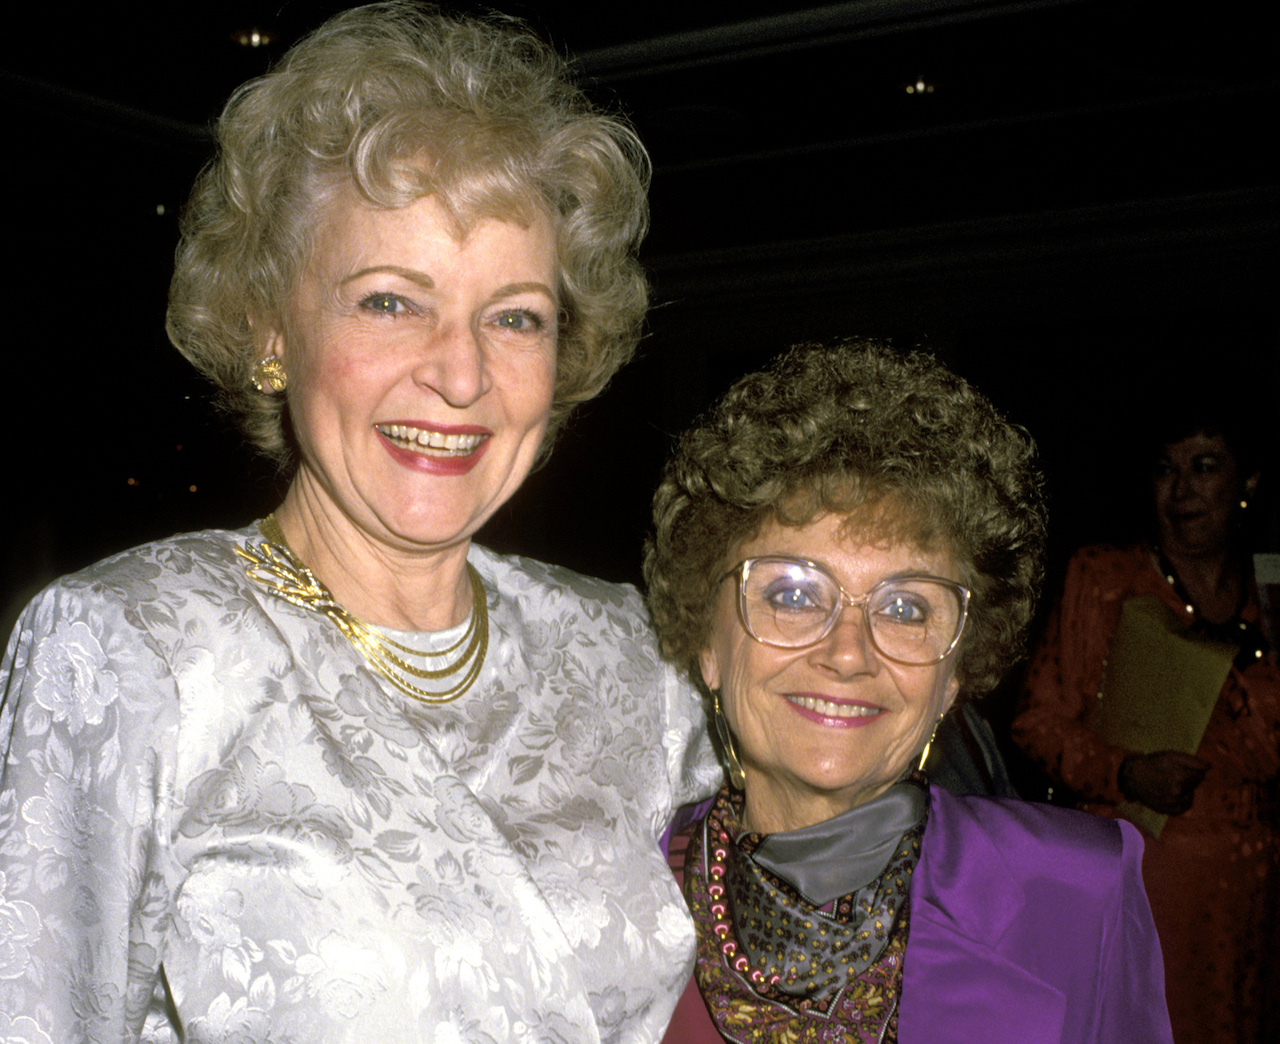 Betty White in a silky, white top, standing with Estelle Getty in purple